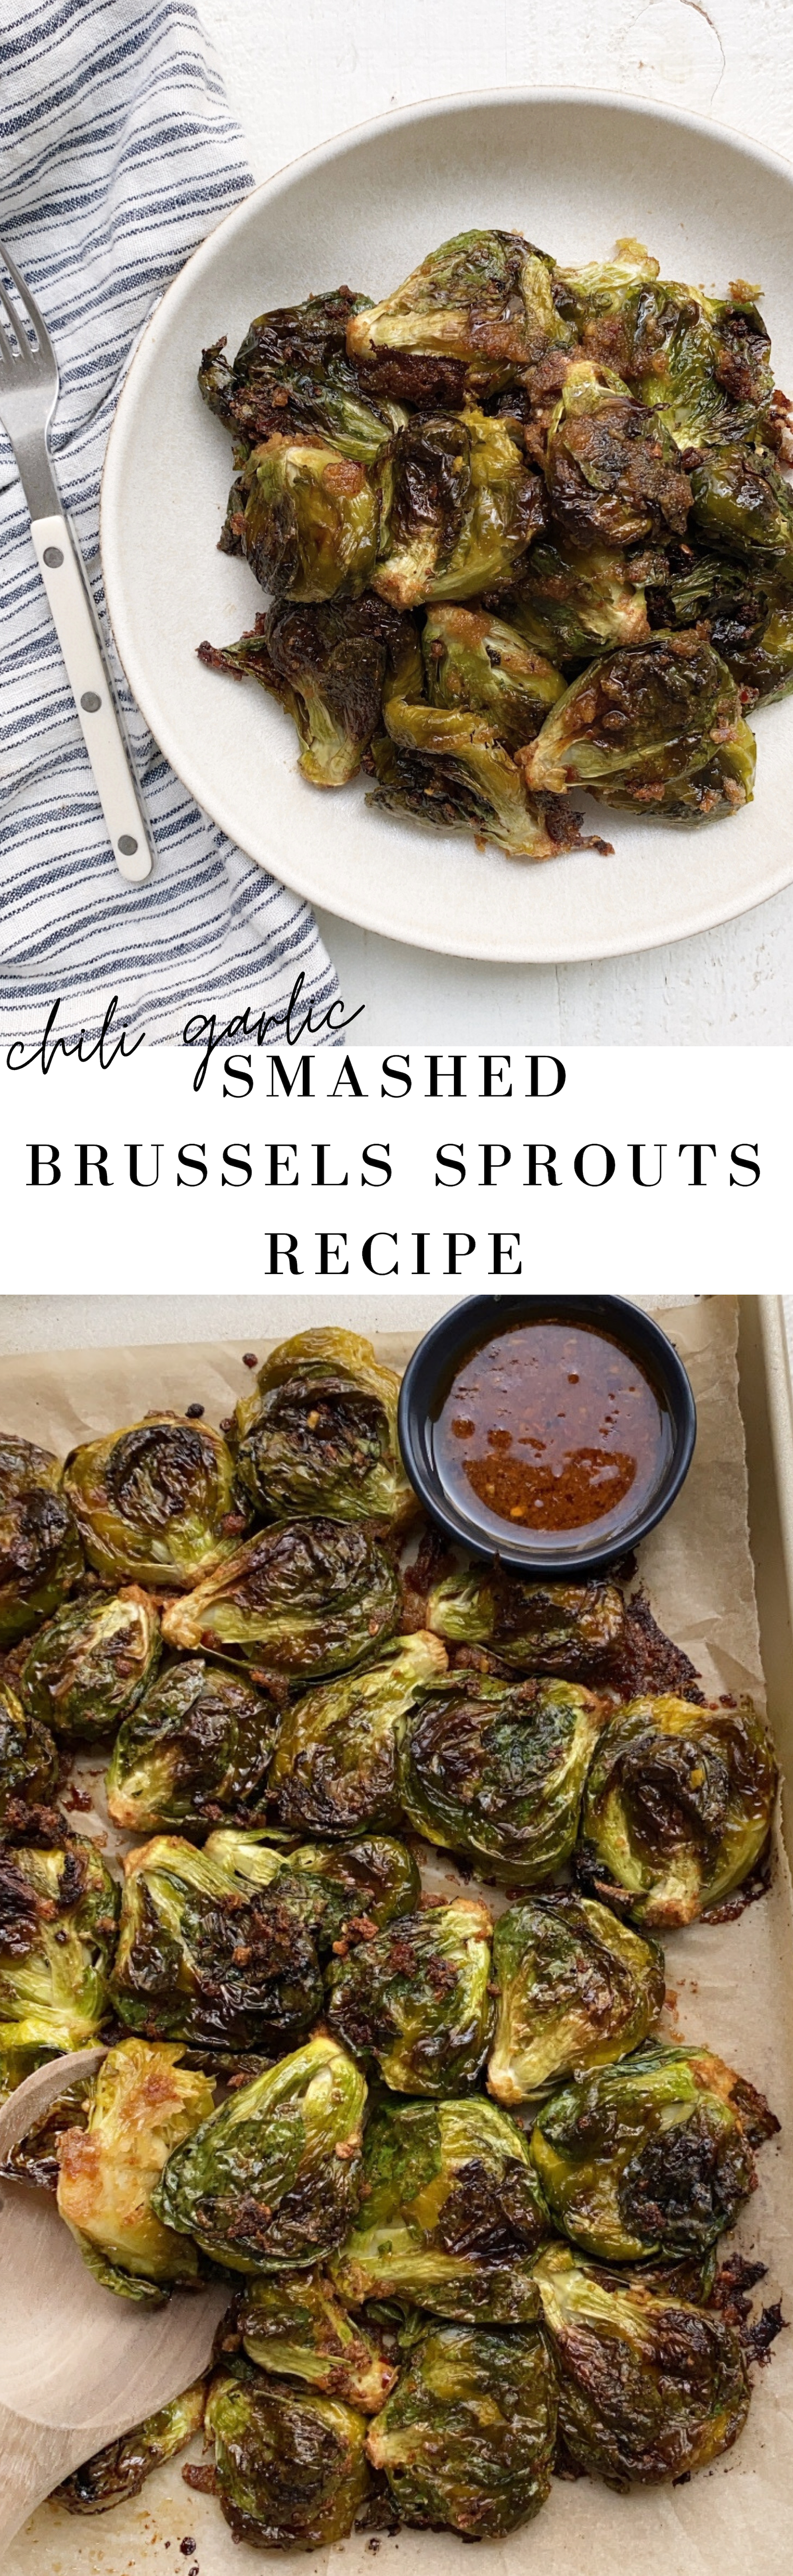 Chili Garlic Smashed Brussels Sprouts Recipe